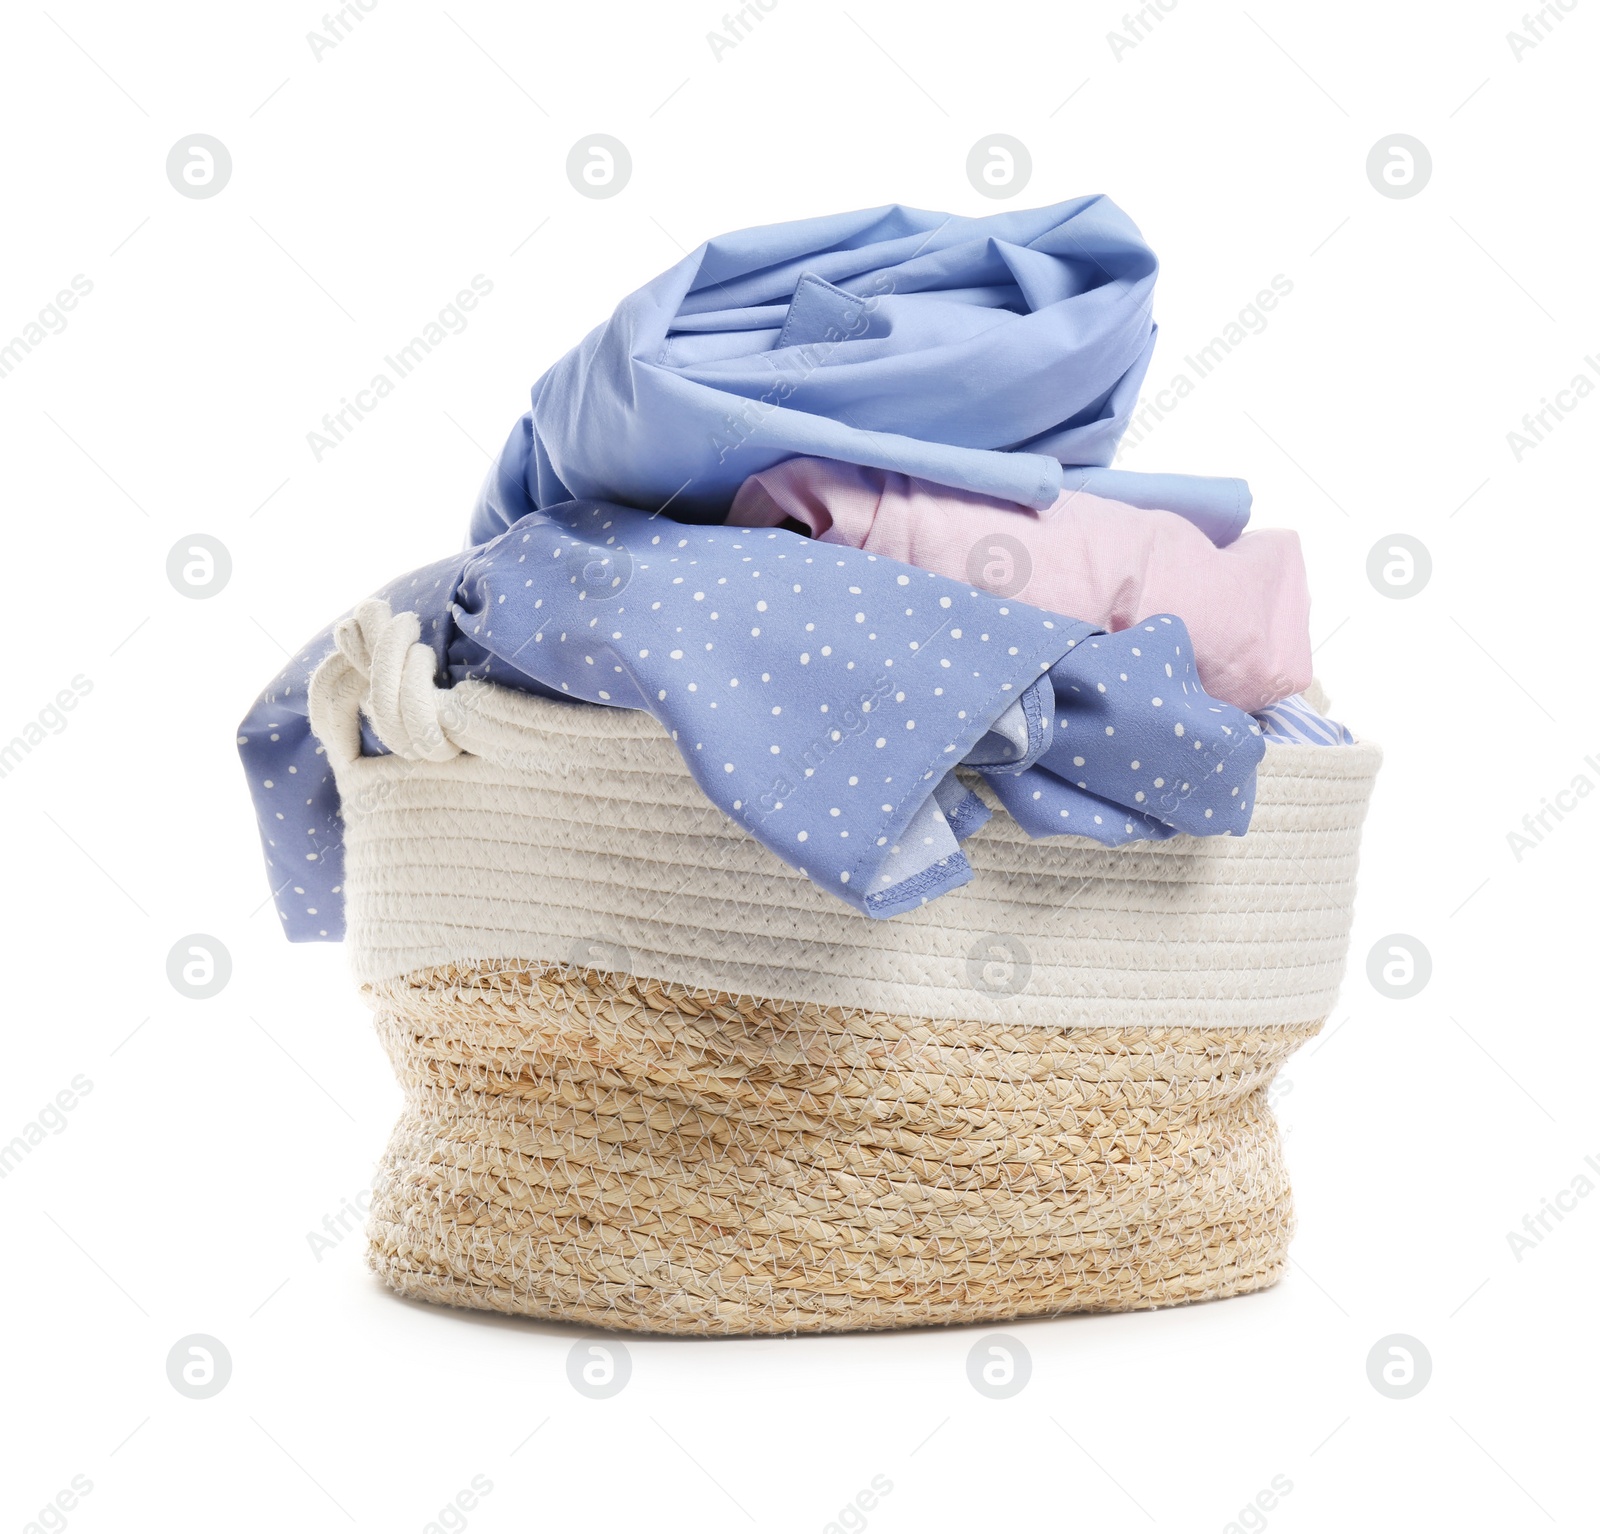 Photo of Wicker laundry basket full of clothes isolated on white